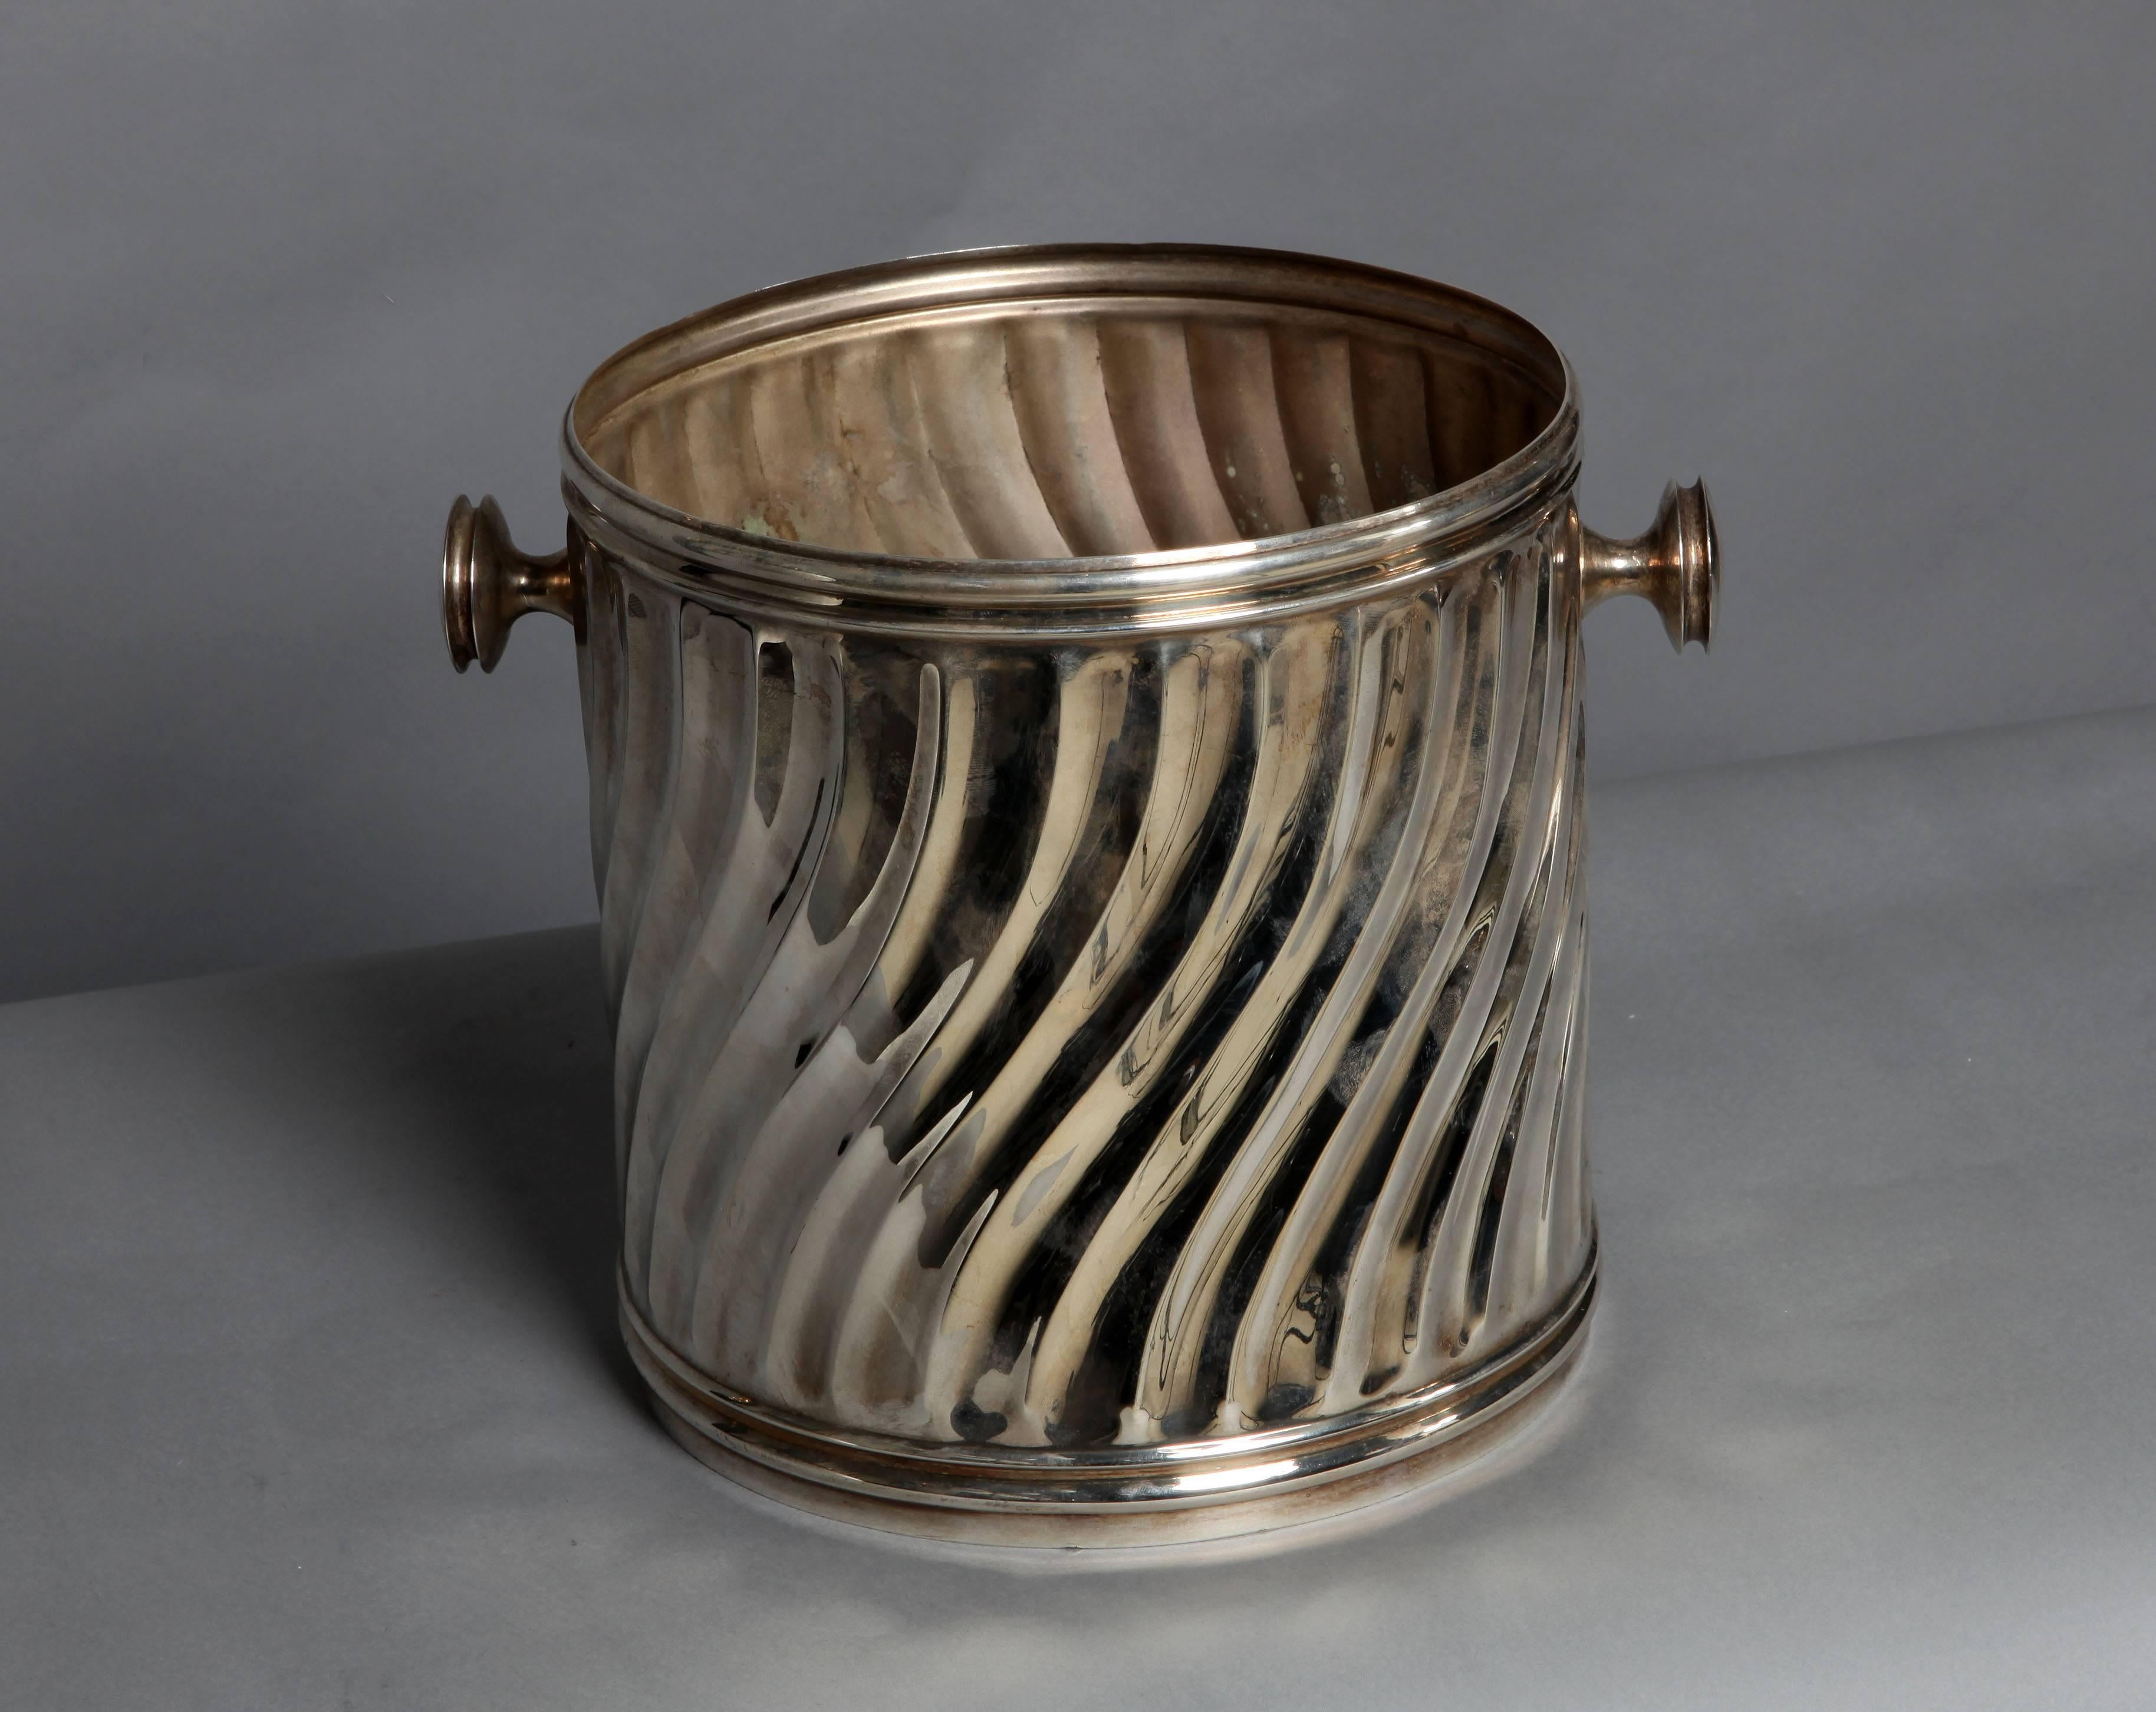 A silver plated Italian bucket with wavy surface.